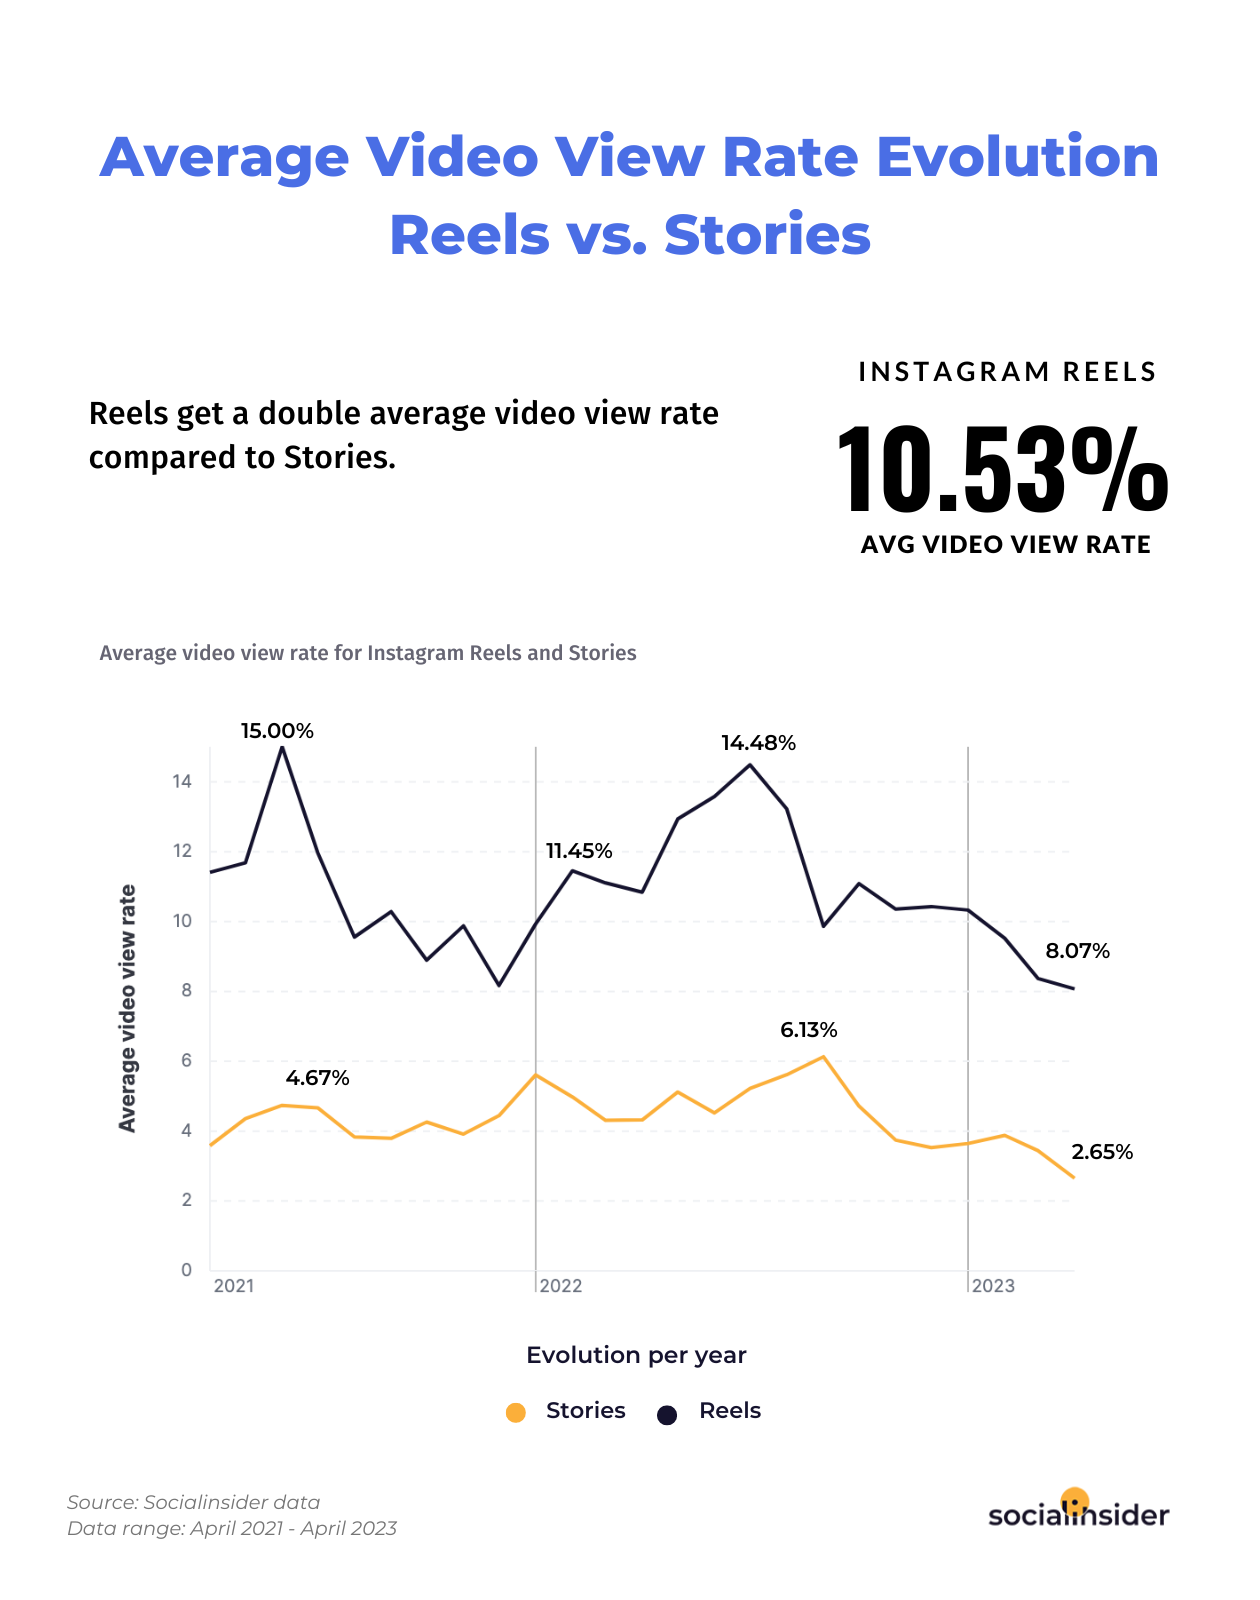 This is a chart showing the video view rate evolution for Instagram Reels vs Stories.